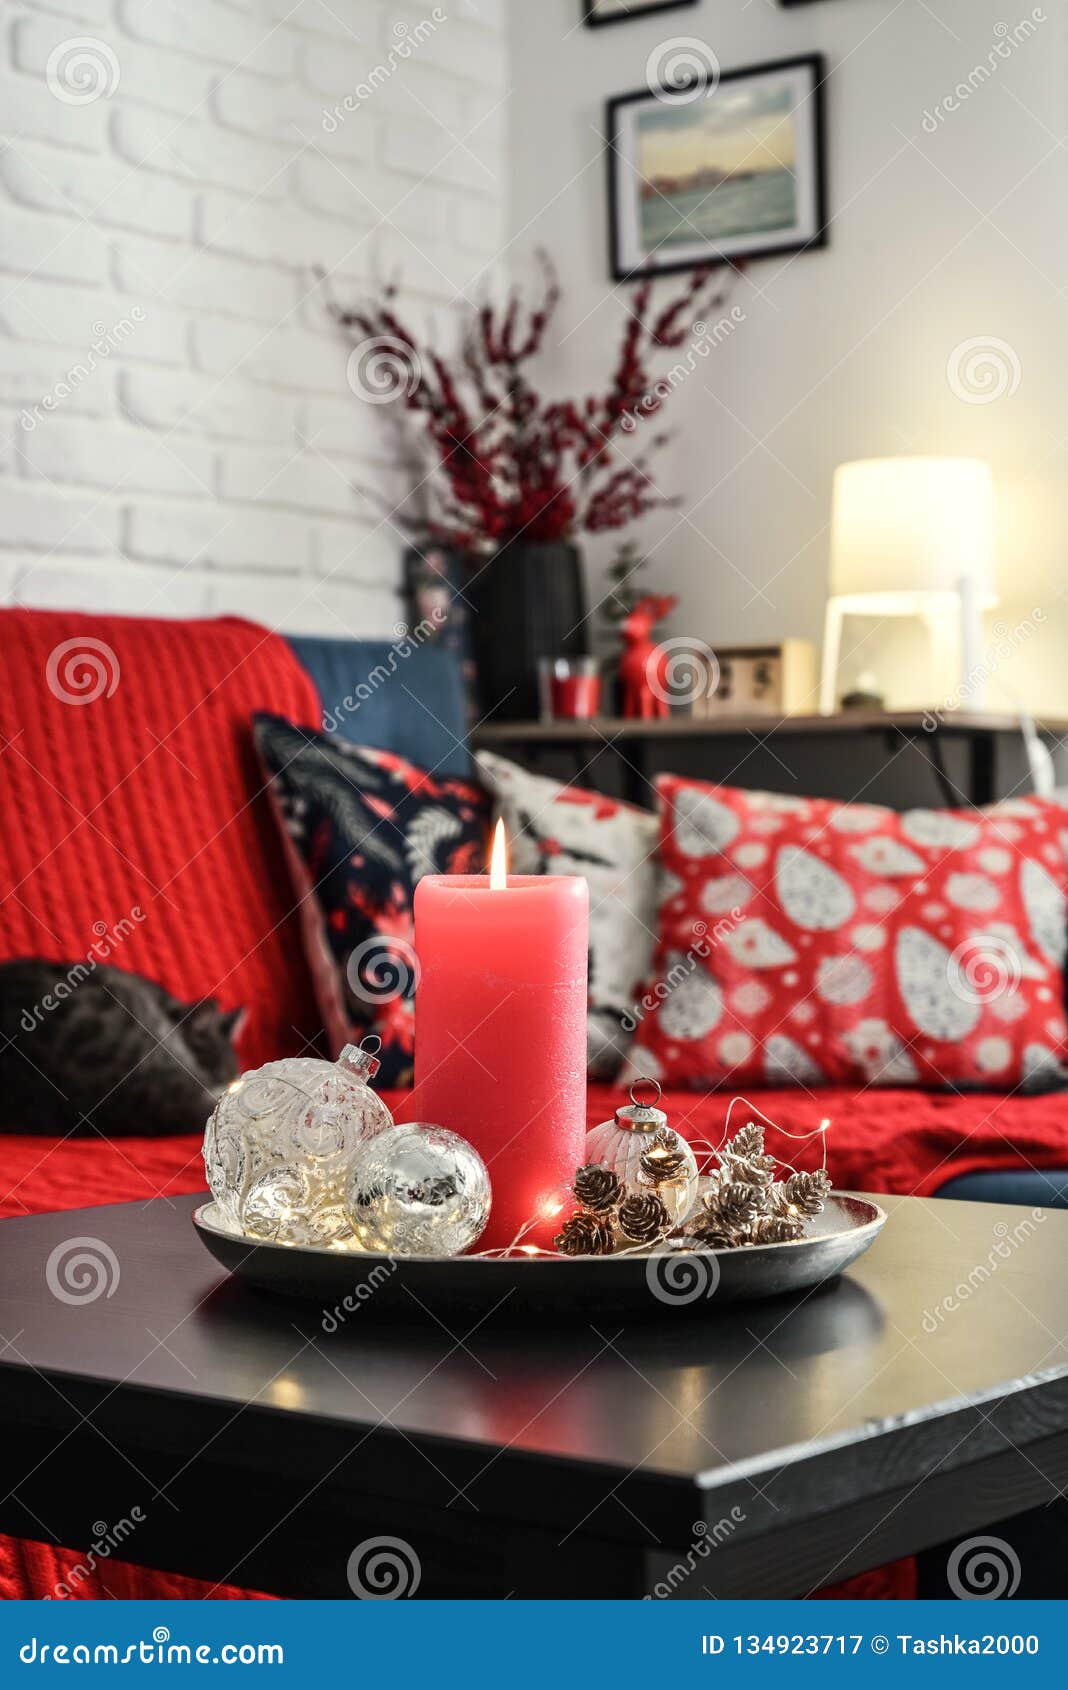 Christmas Decorations with Candle on Coffee Table Stock Image ...